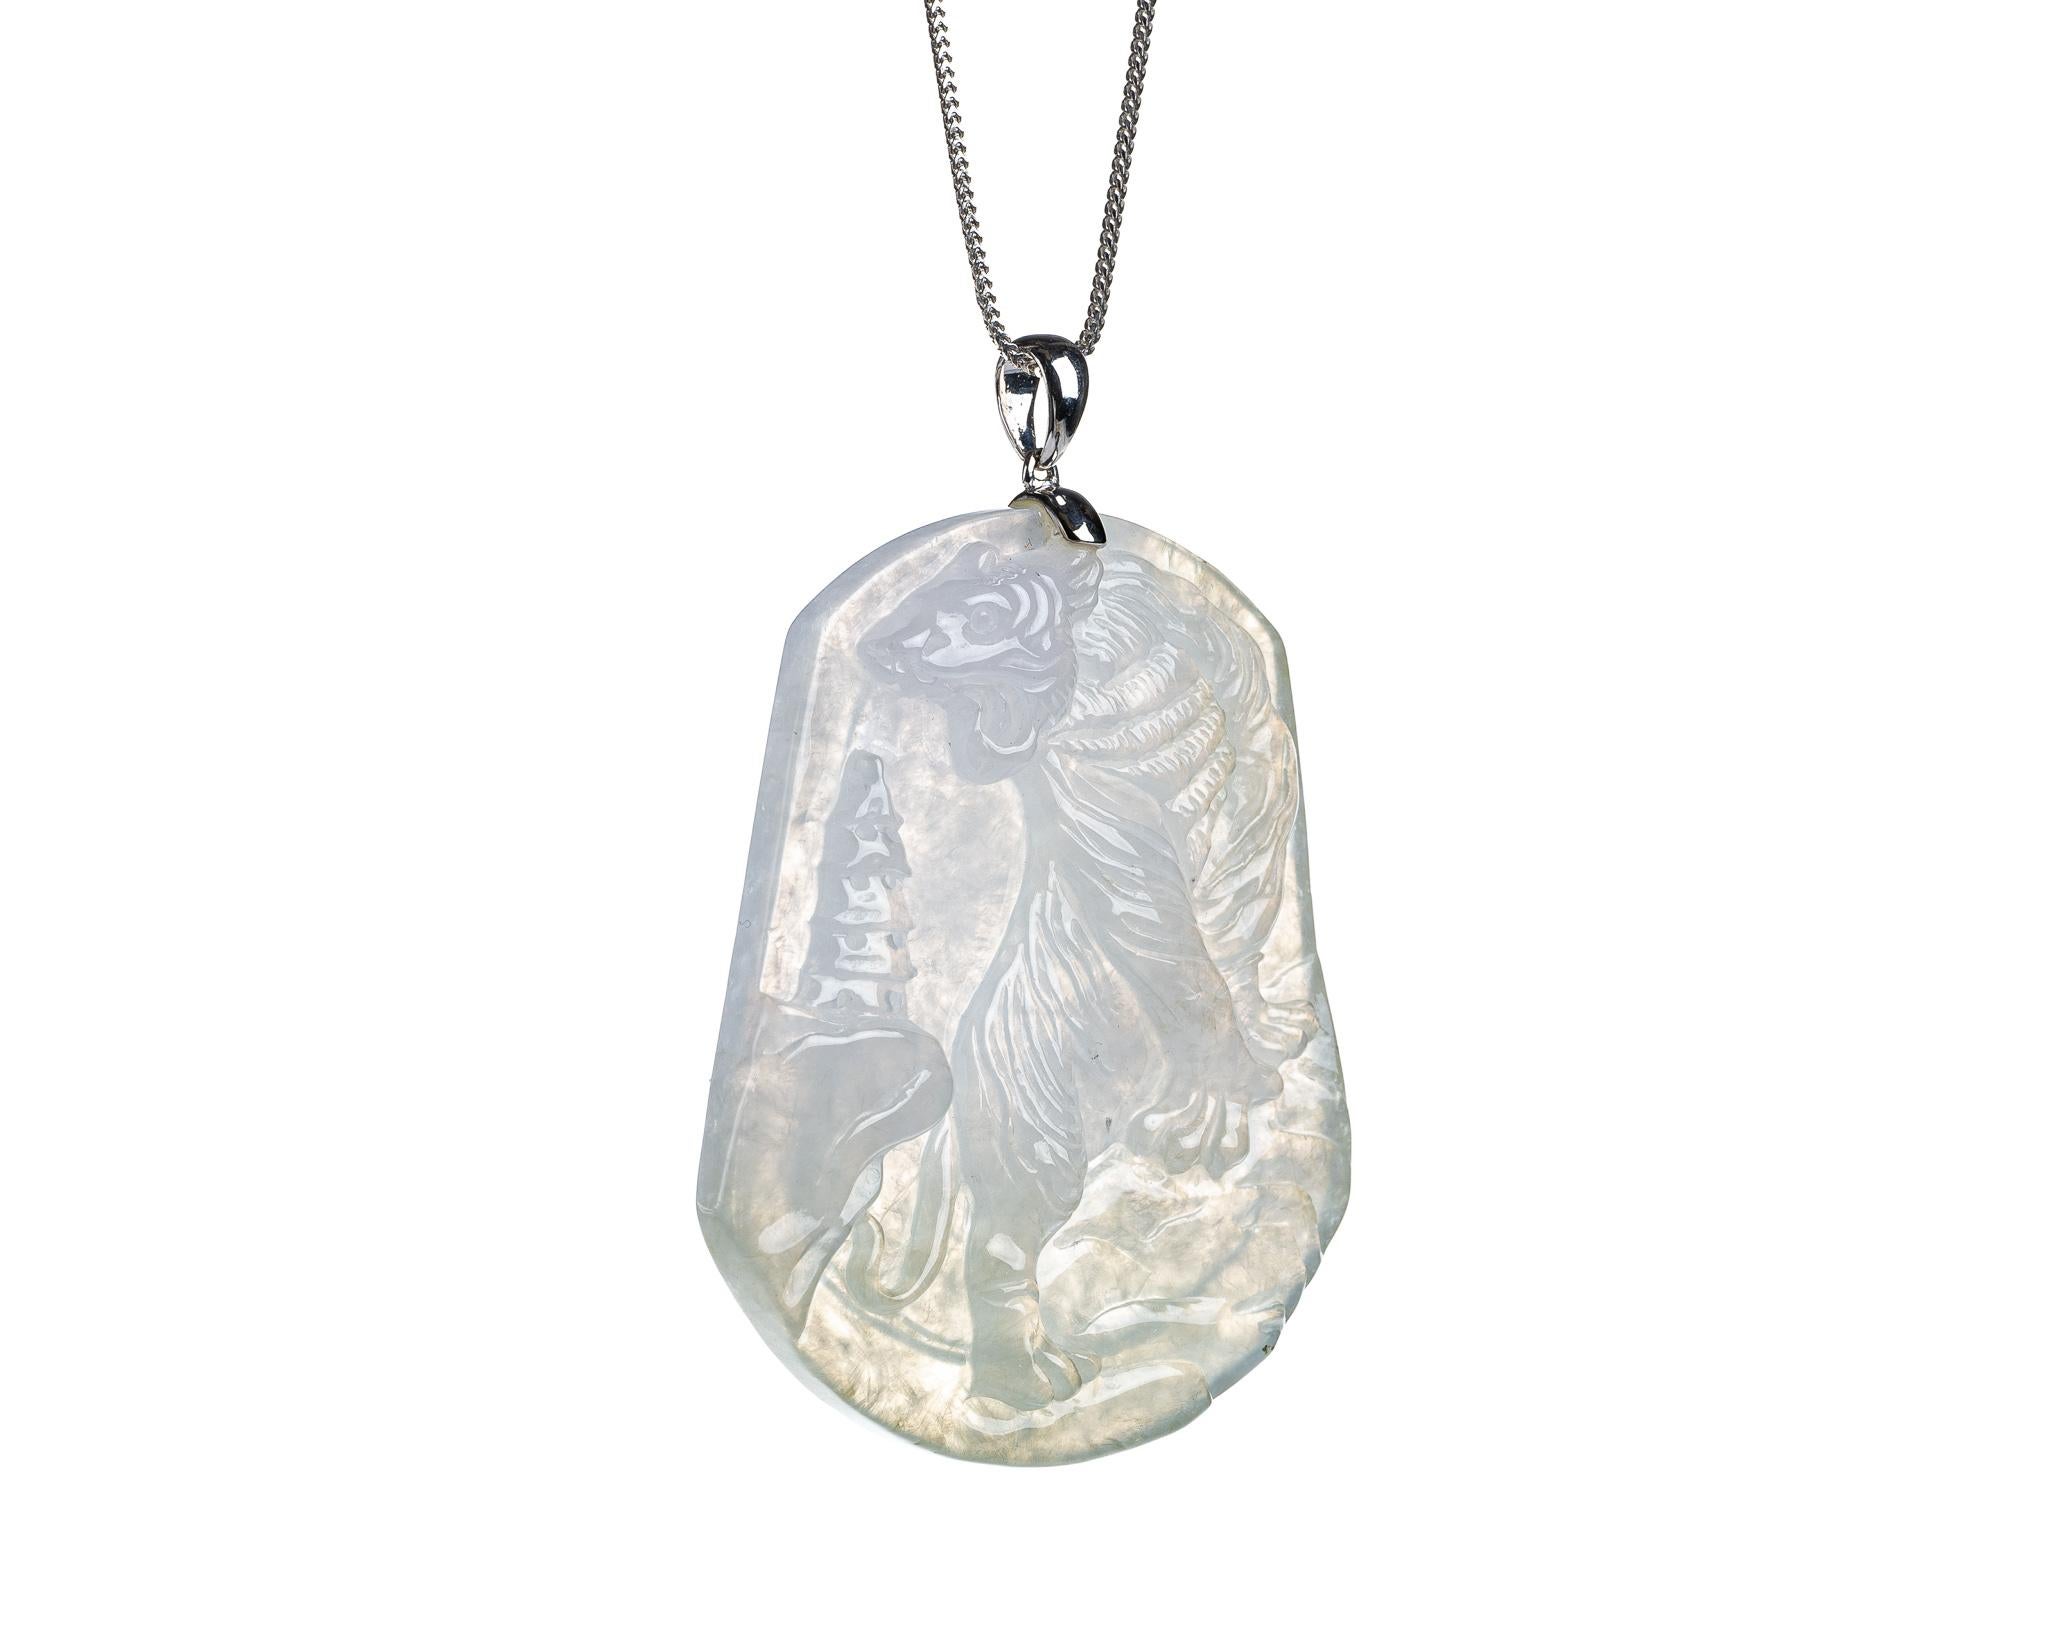 This is an all natural, untreated jadeite jade carved tiger pendant set on an 18K white gold bail.  The carved tiger symbolizes power, courage and strength.
   
It measures 1.89 inches (48mm) x 2.14 inches (54.5mm) with thickness of 0.27 inches